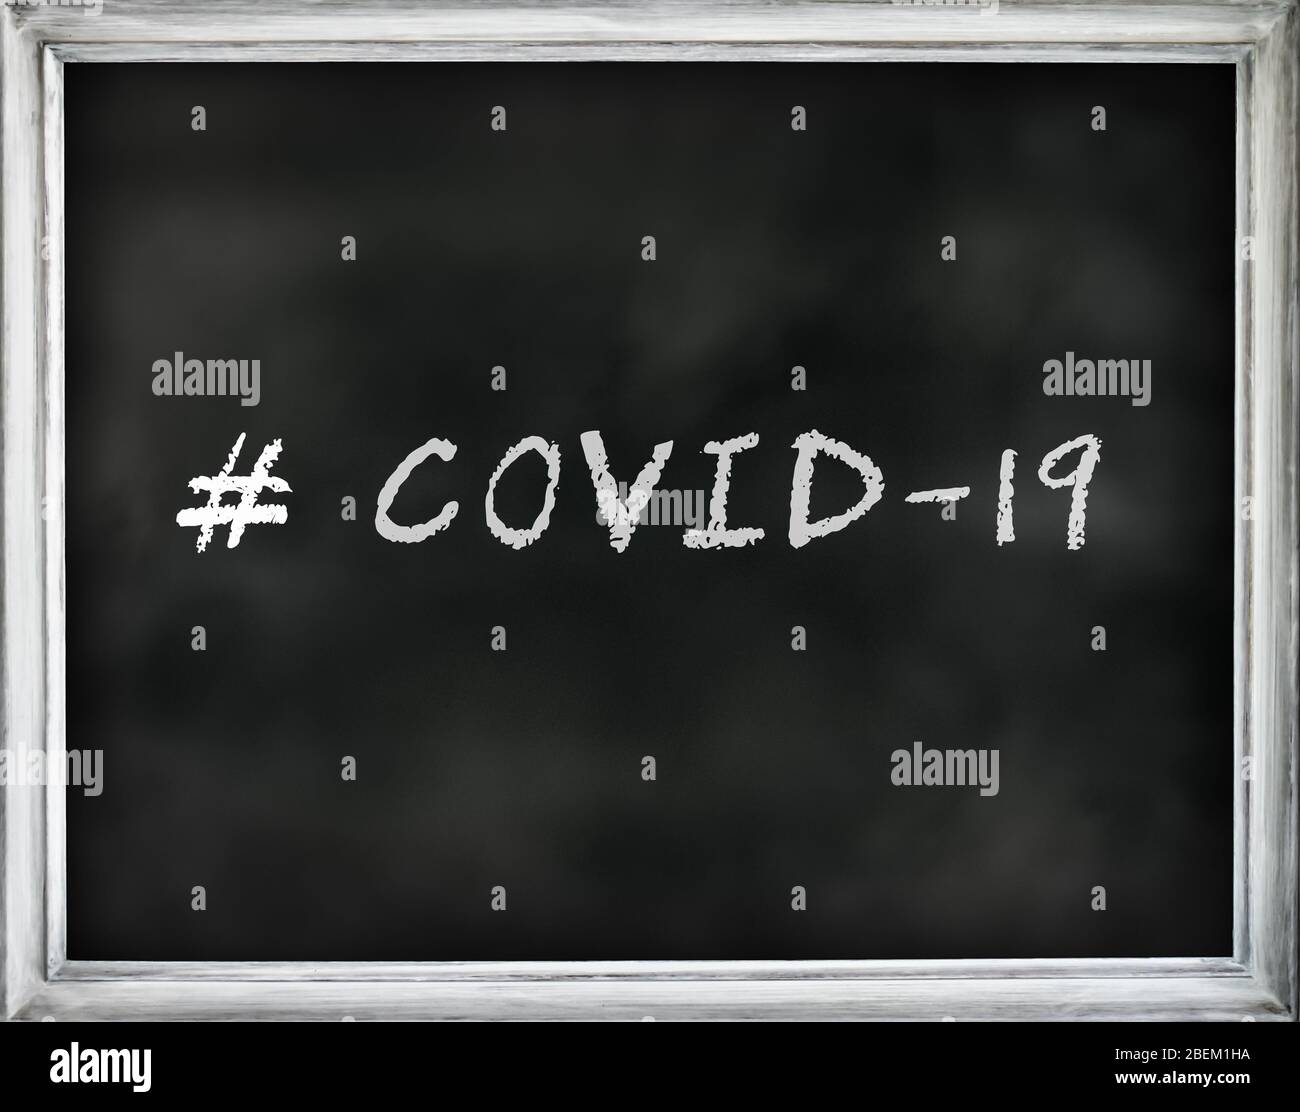 # COVID-19 written text on black chalkboard with white frame. Stock Photo